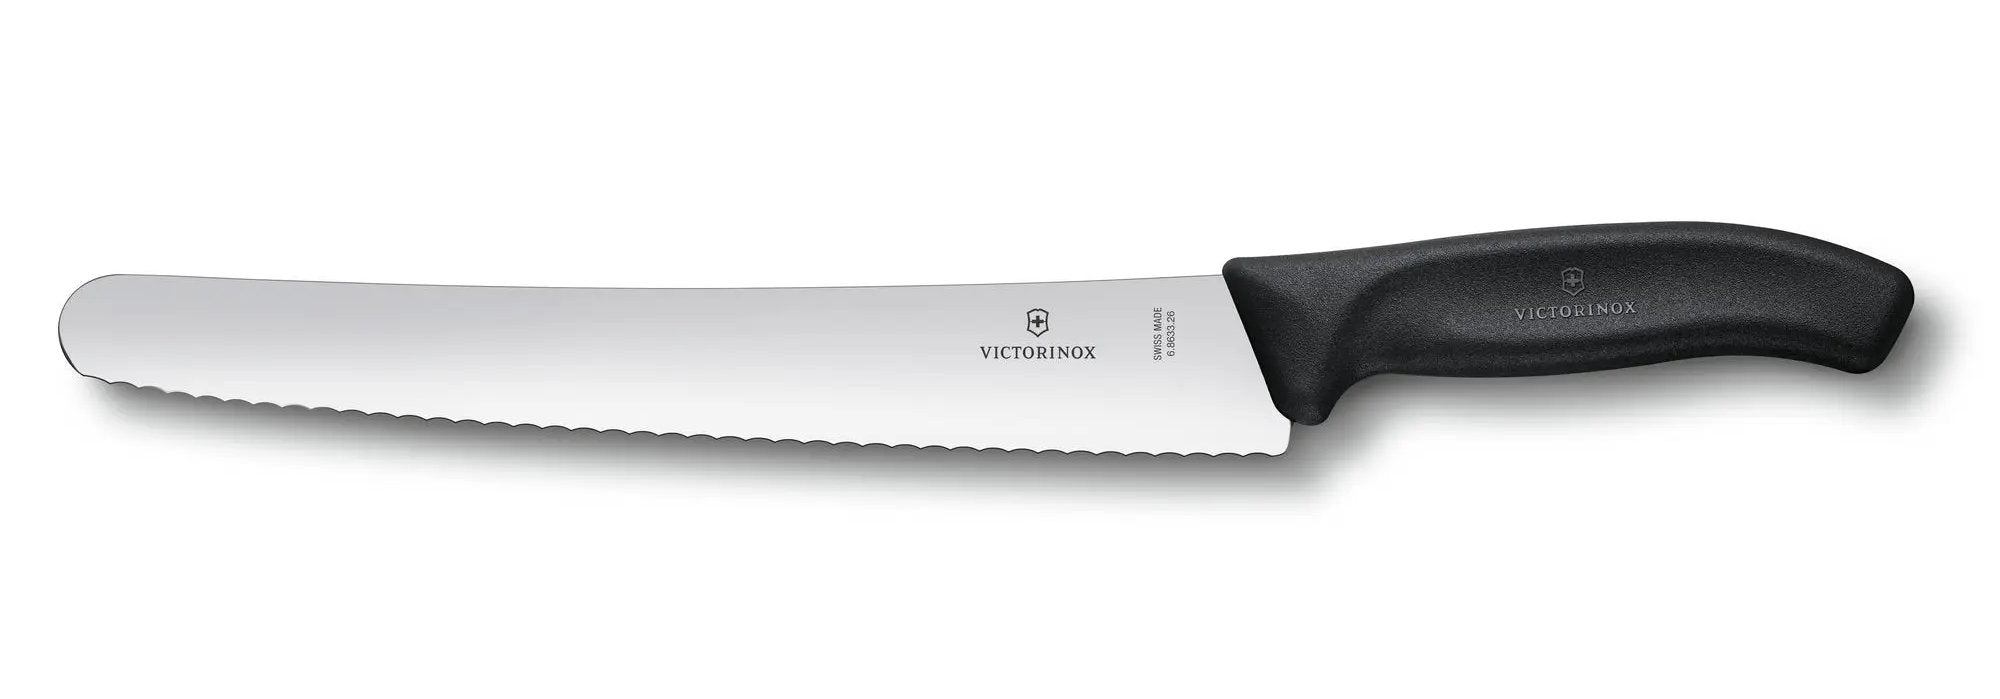 Victorinox 10" (26cm) Swiss Classic Bread and Pastry Knife - 6.8633.26-X1